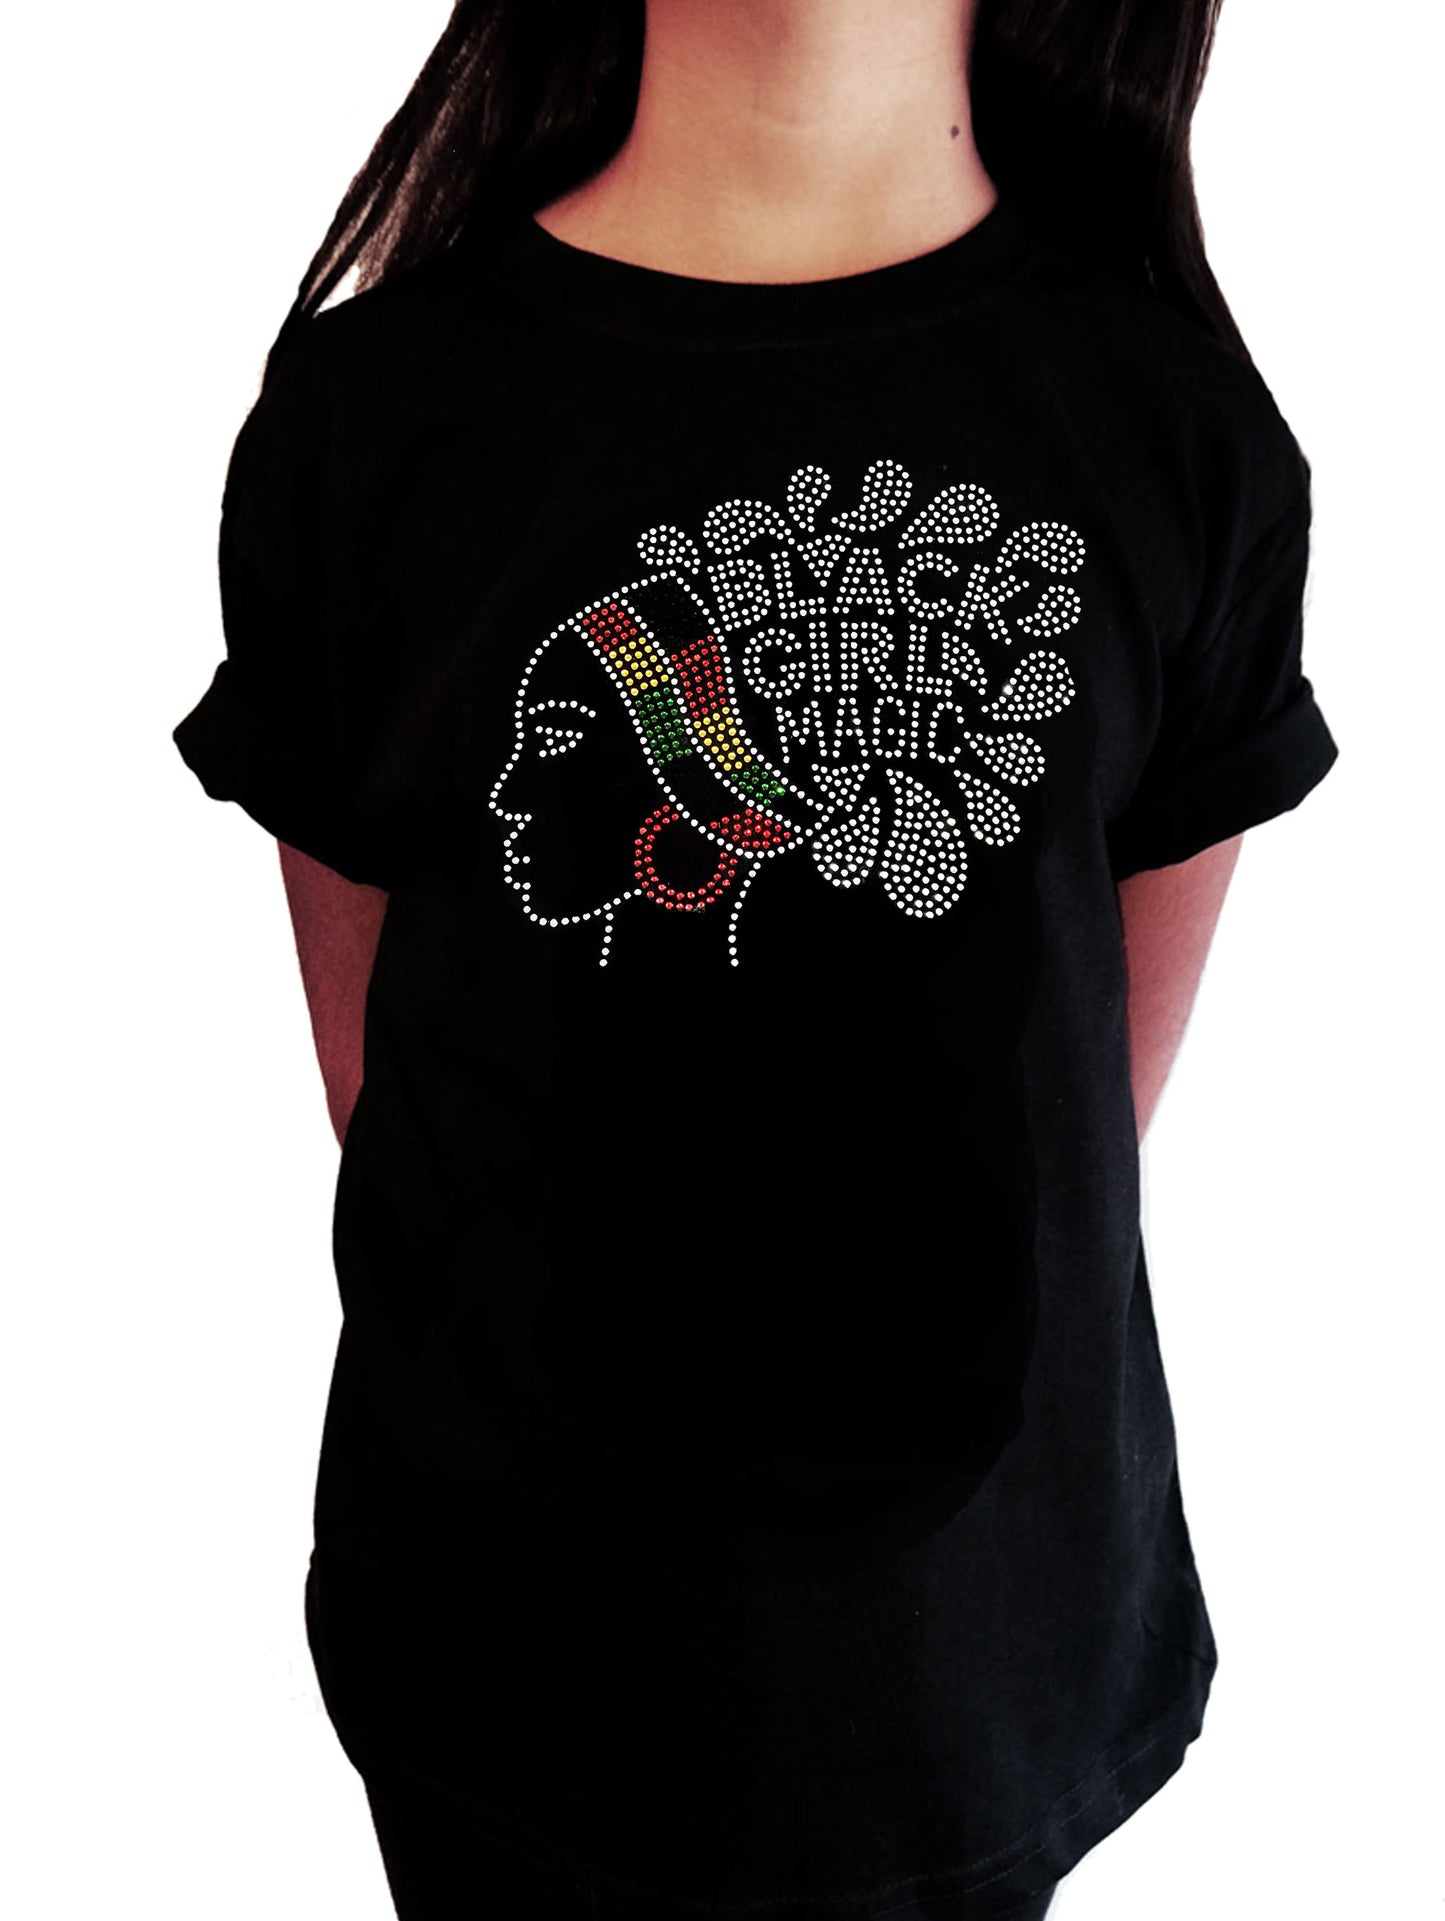 Girls Rhinestone T-Shirt " Black Girl Magic in African Colors in Rhinestones " Kids Size 3 to 14 Available